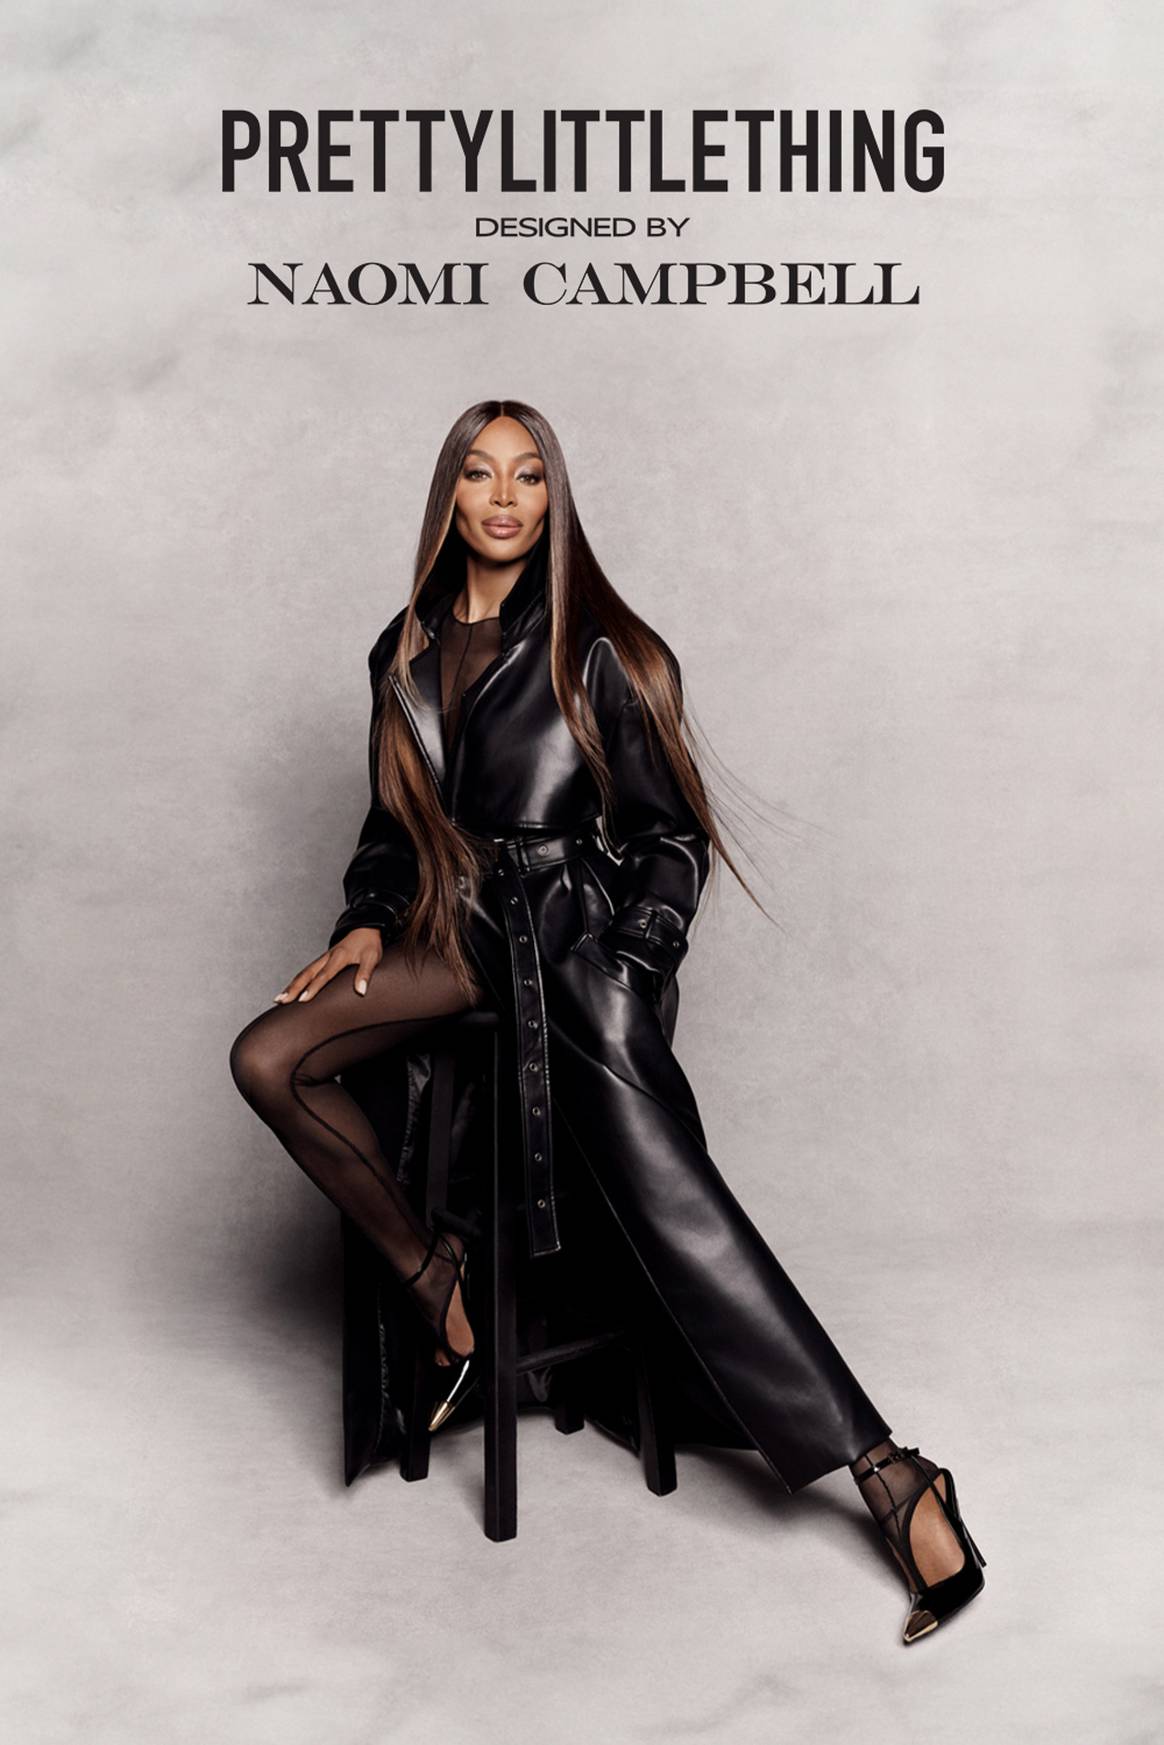 PrettyLittleThing annonce une collaboration avec Naomi Campbell.